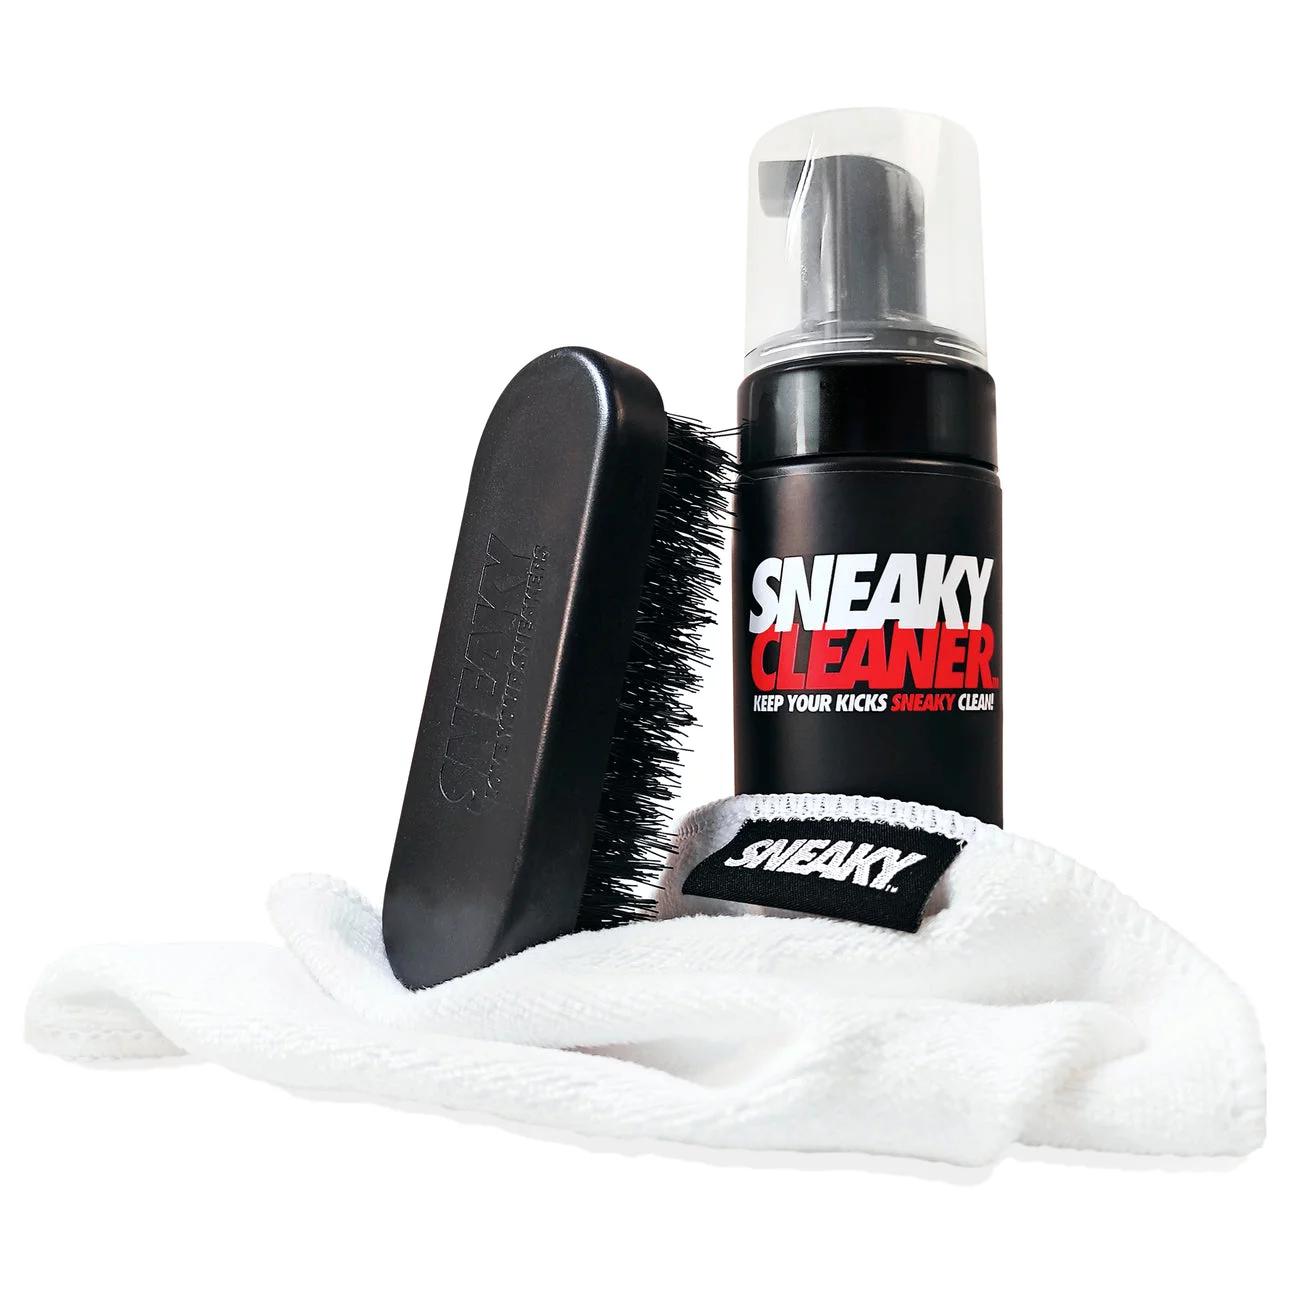 Accessory Sneaky Cleaning Kit SB-CLK